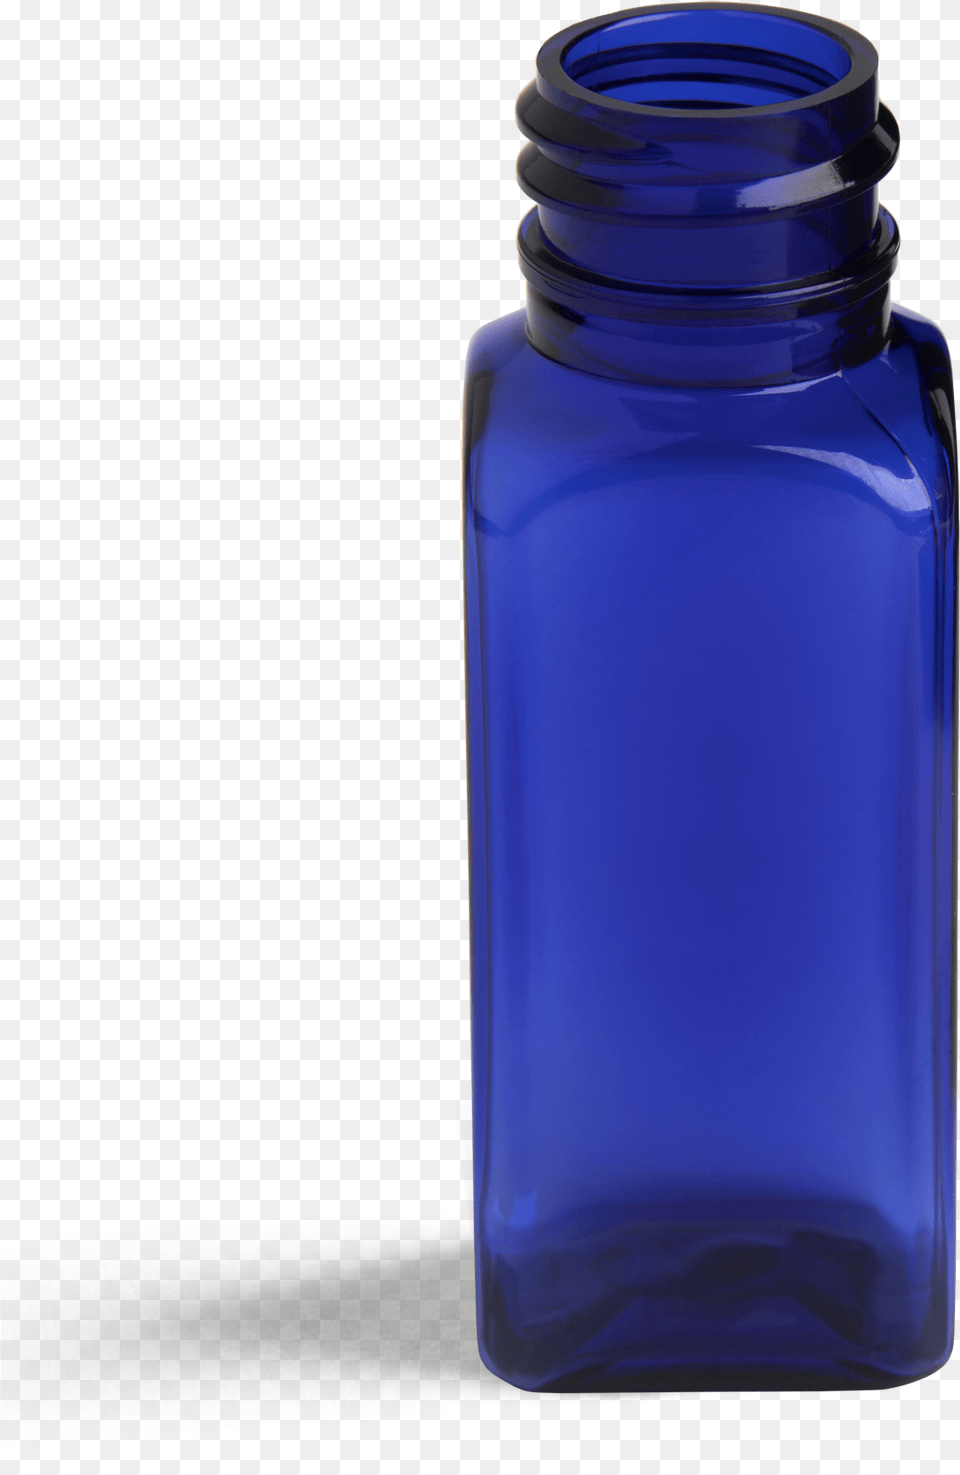 Oz French Square, Bottle, Jar, Glass, Shaker Free Png Download